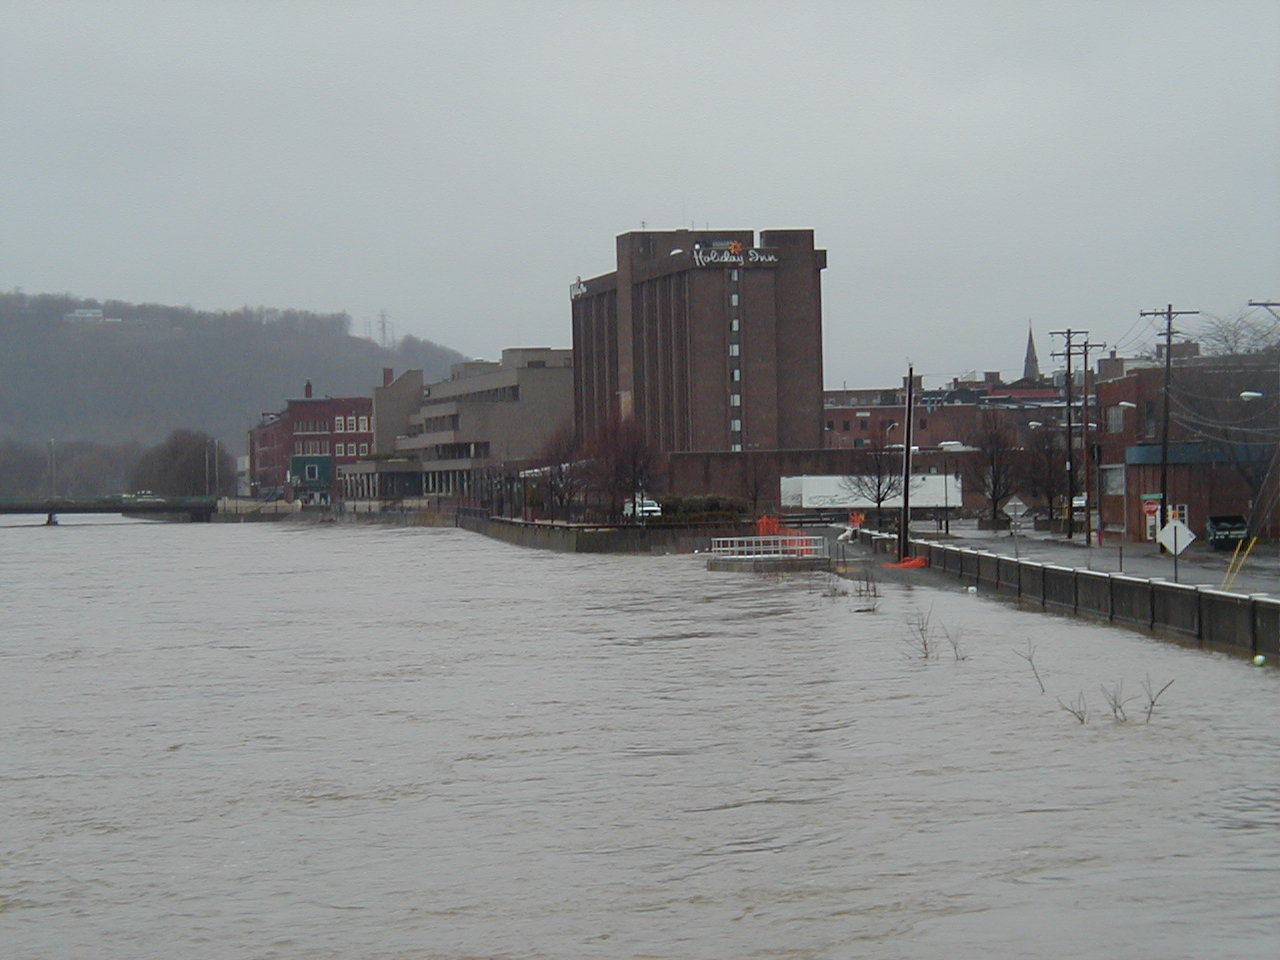 Another shot looking north on the Chenango River, Binghamton, NY